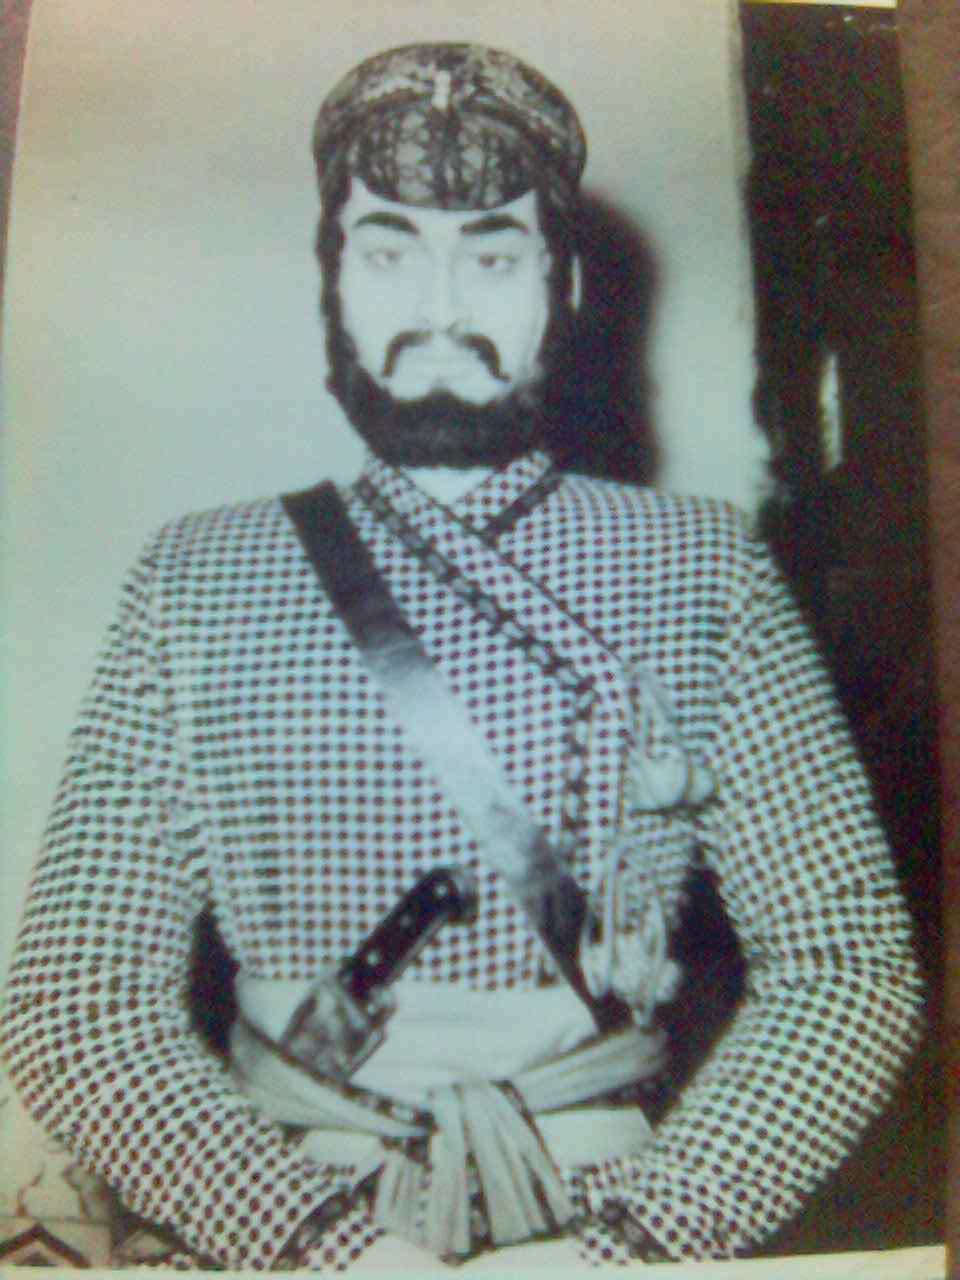 LIFE SIZE MUGHAL SOLDIER SCULPTURE ON THE ORDER OF PRIME MINISTER ZULIFQAR ALI BHUTTO